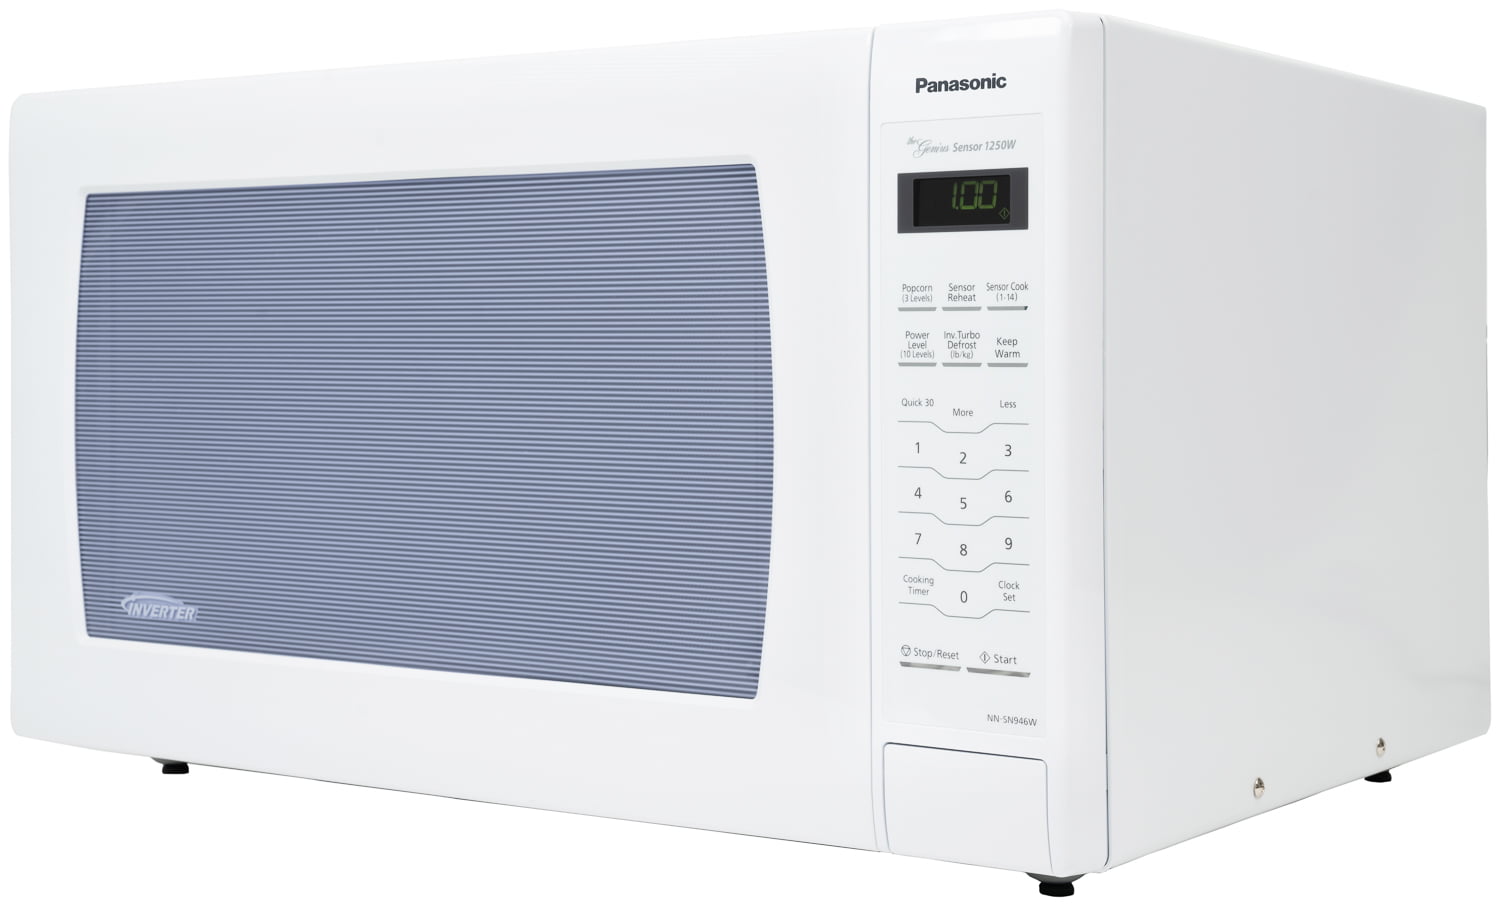 Panasonic Countertop Microwave Oven With Genius Sensor Cooking And